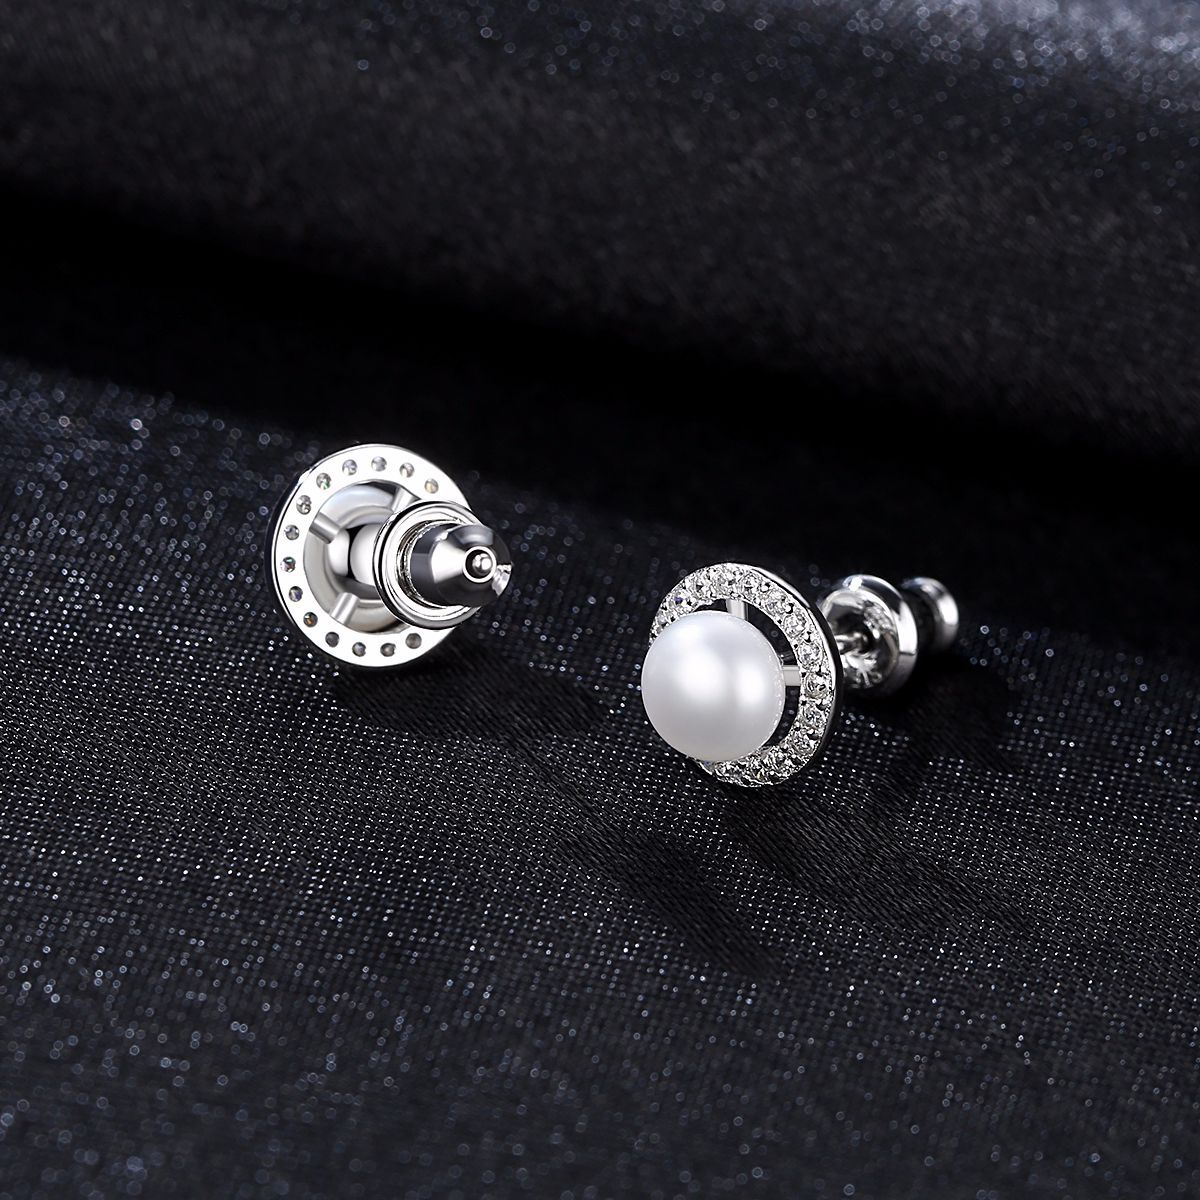 High Quality Natural Freshwater Pearl Diamond s925 Sterling Silver Earrings -FE0085